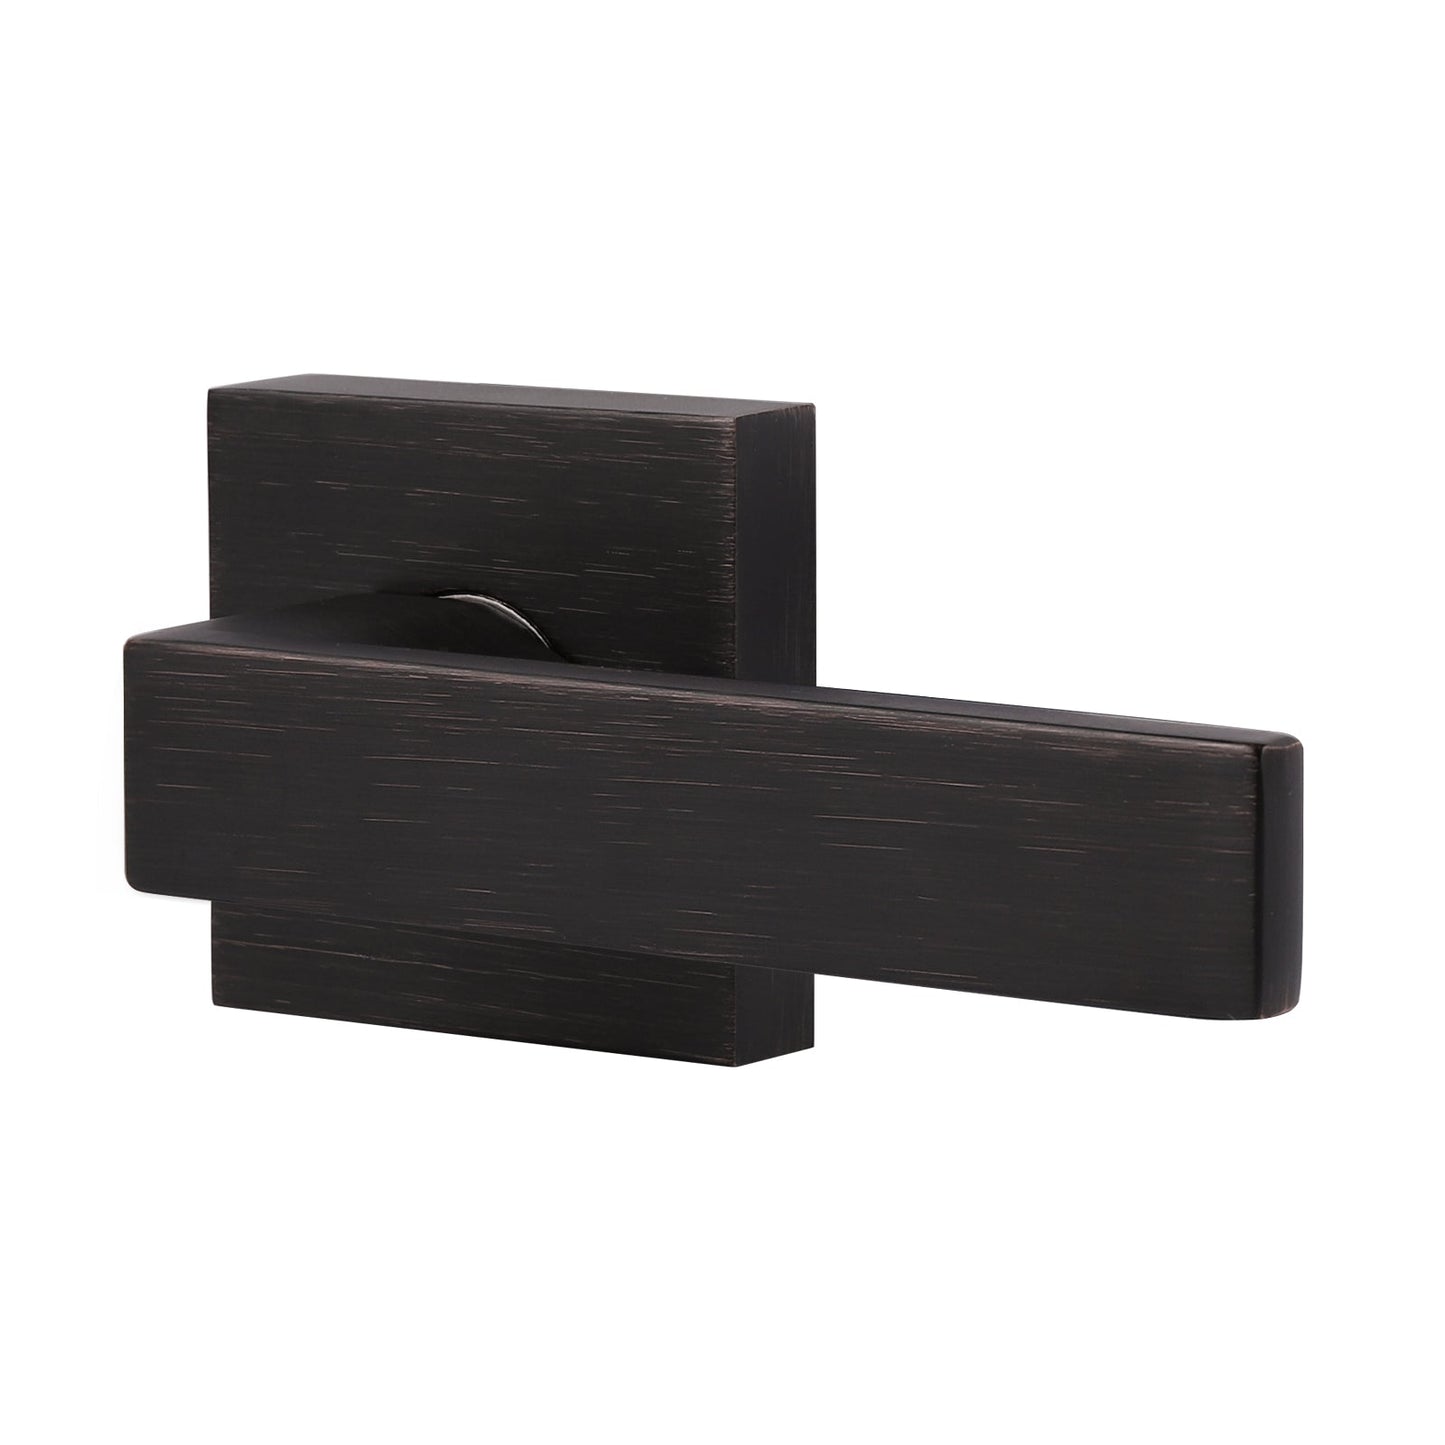 Heavy Duty Door Handles with Square Design Oil Rubbed Bronze Finish DL01ORB